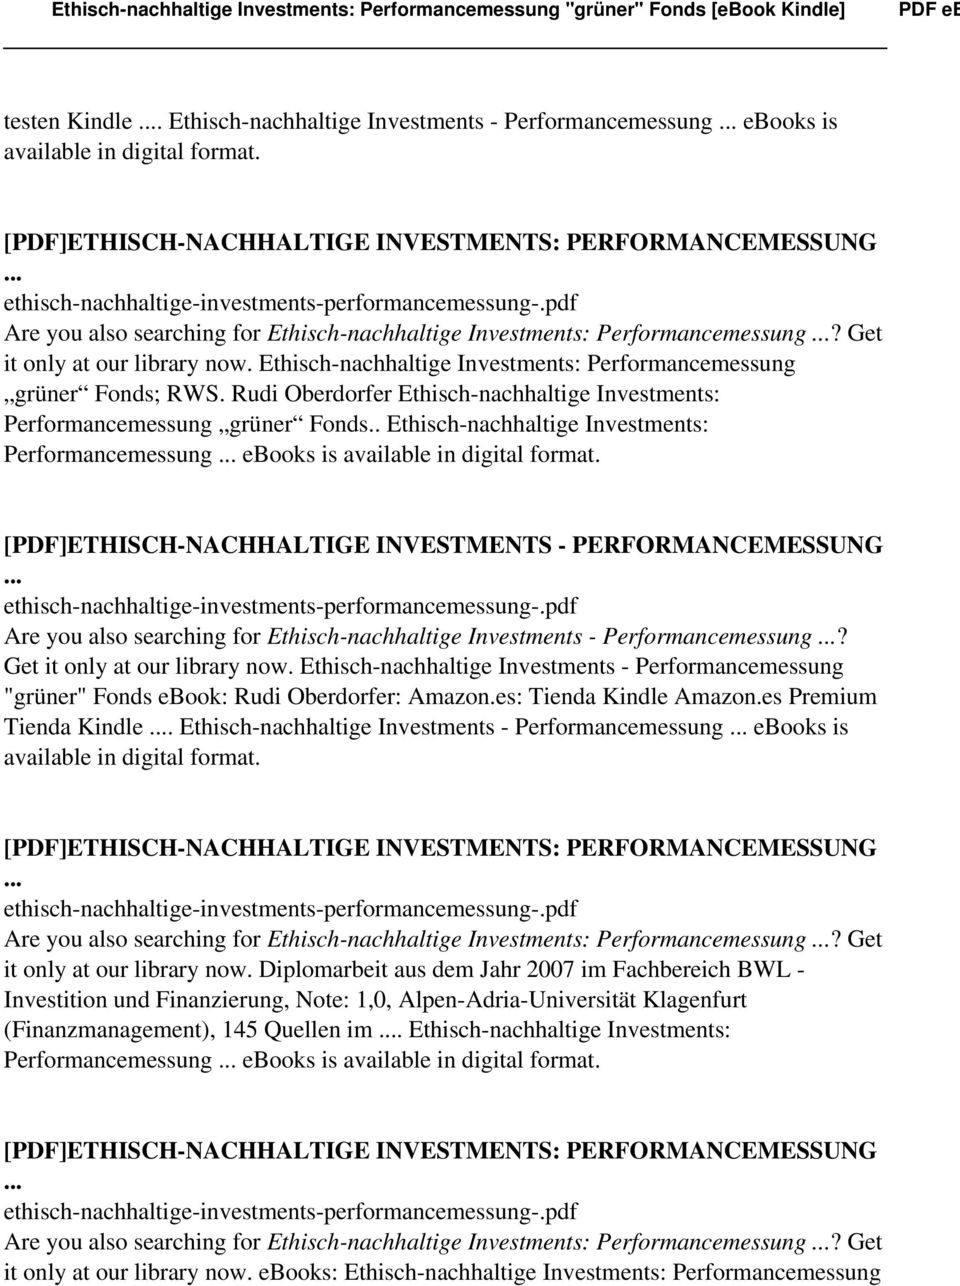 . Ethisch-nachhaltige Investments: Performancemessung ebooks is available in digital Are you also searching for Ethisch-nachhaltige Investments - Performancemessung? Get it only at our library now.